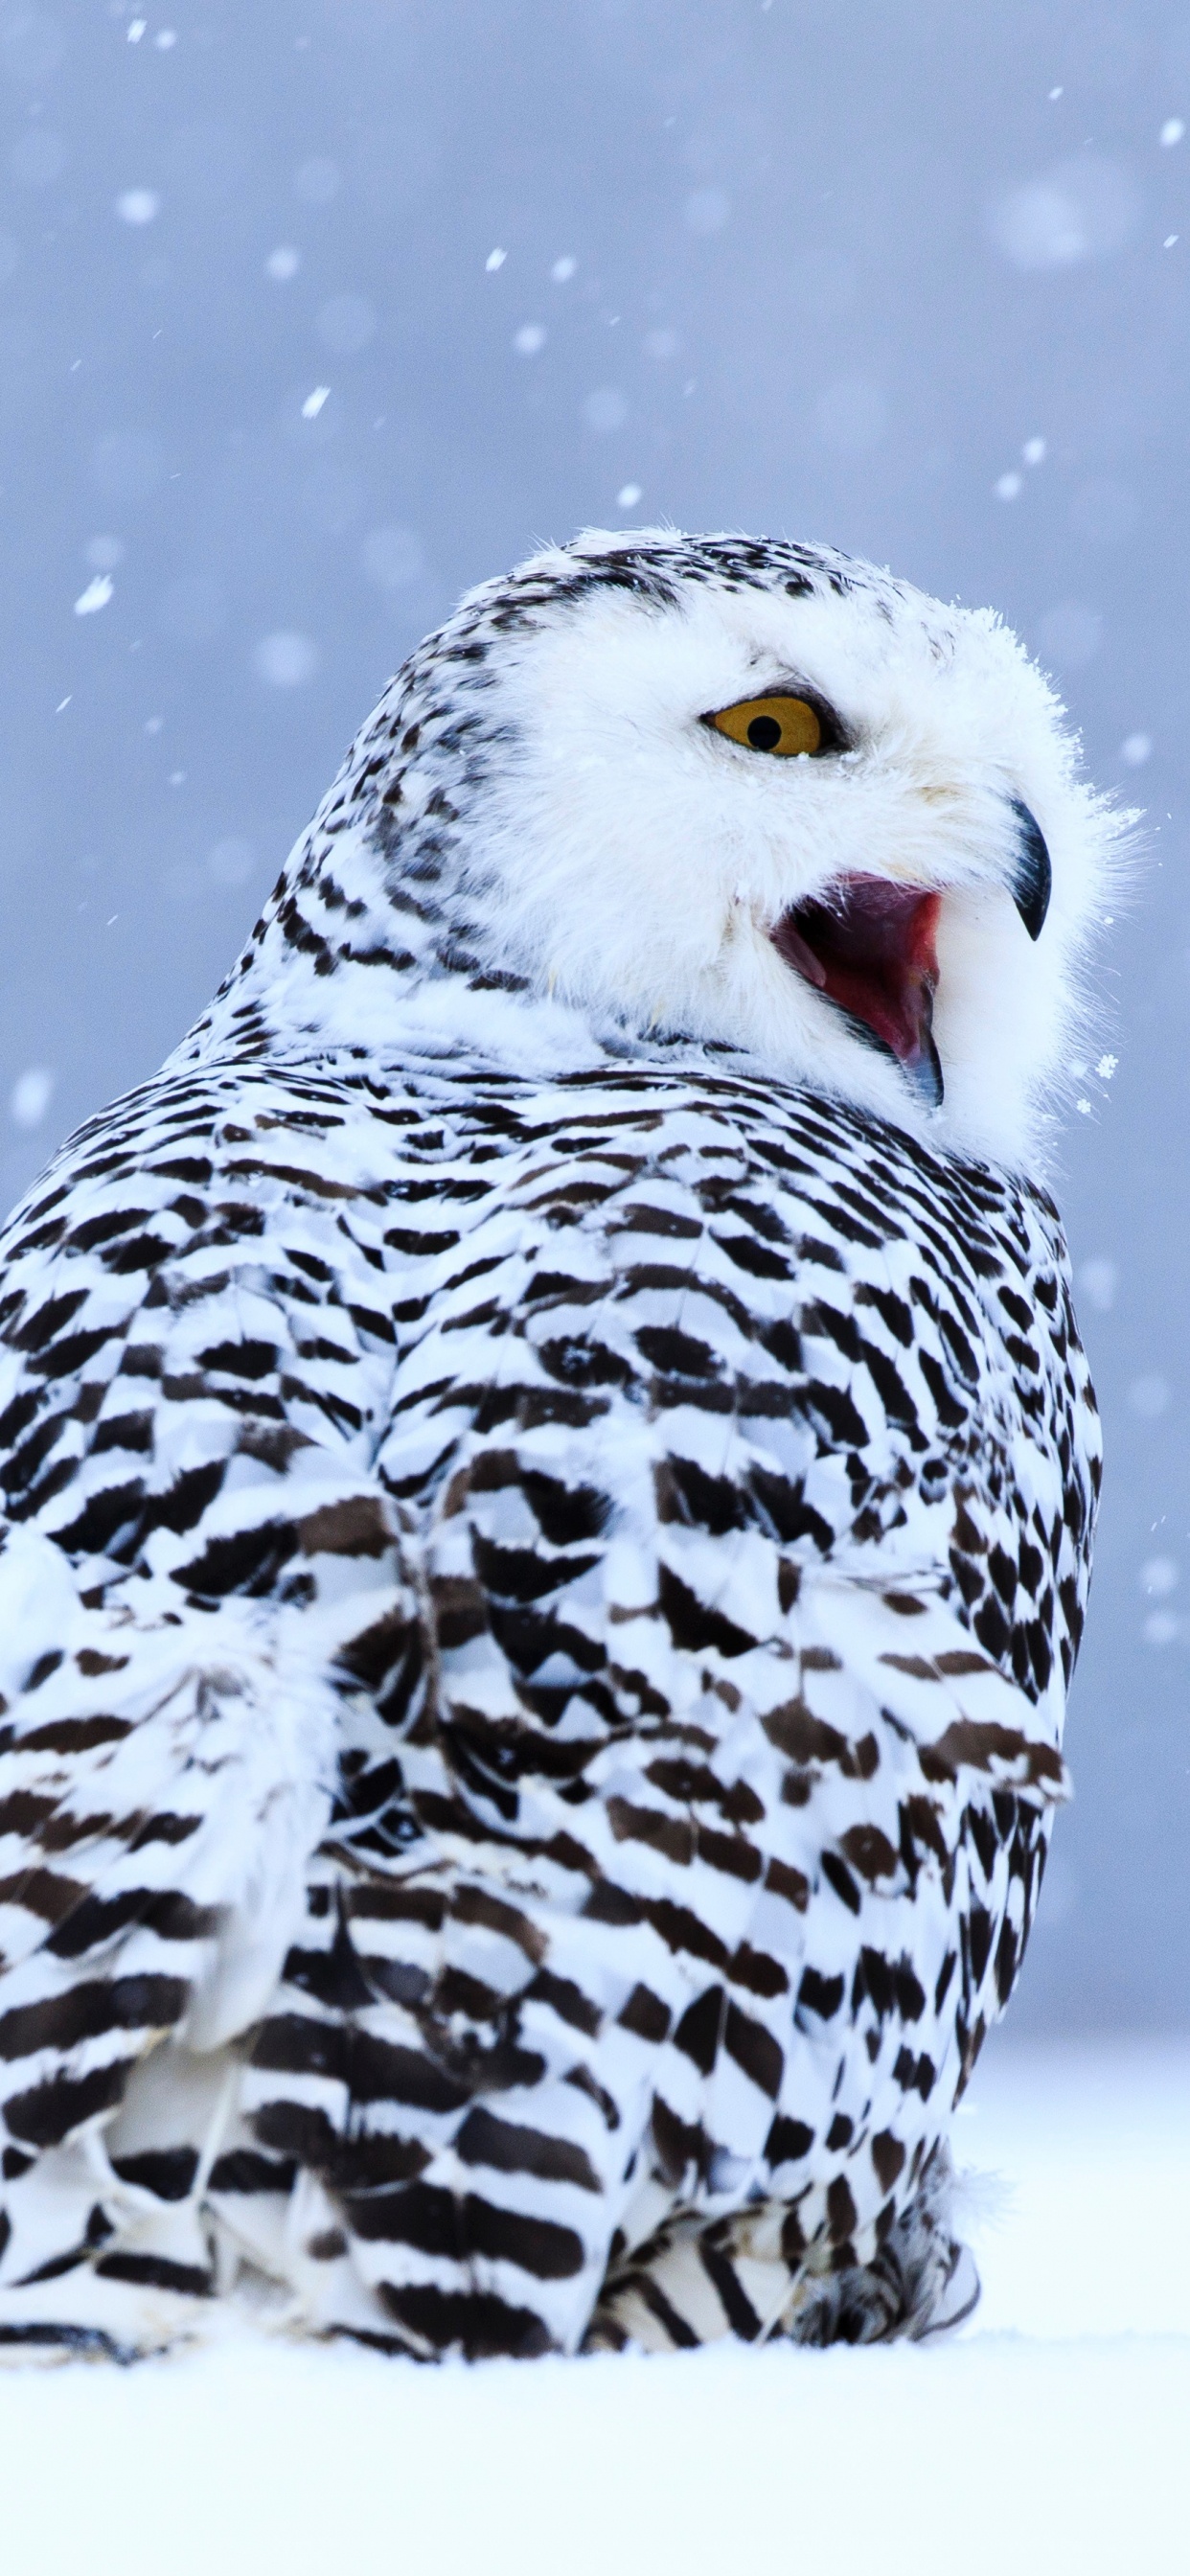 White and Black Owl on Snow Covered Ground During Daytime. Wallpaper in 1242x2688 Resolution